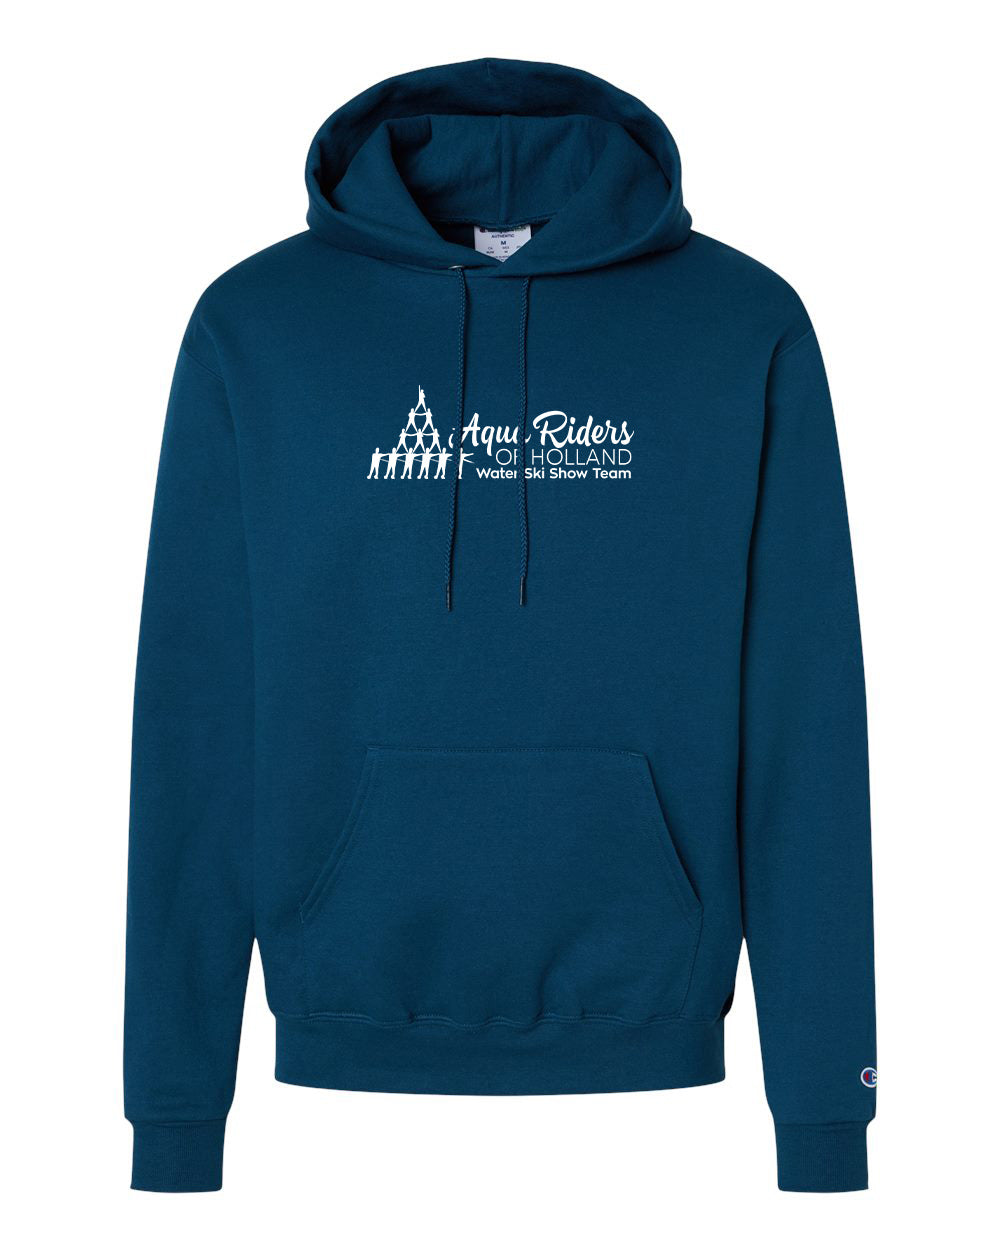 Aqua Riders - Adult Champion Hoodie - S700 (color options available)